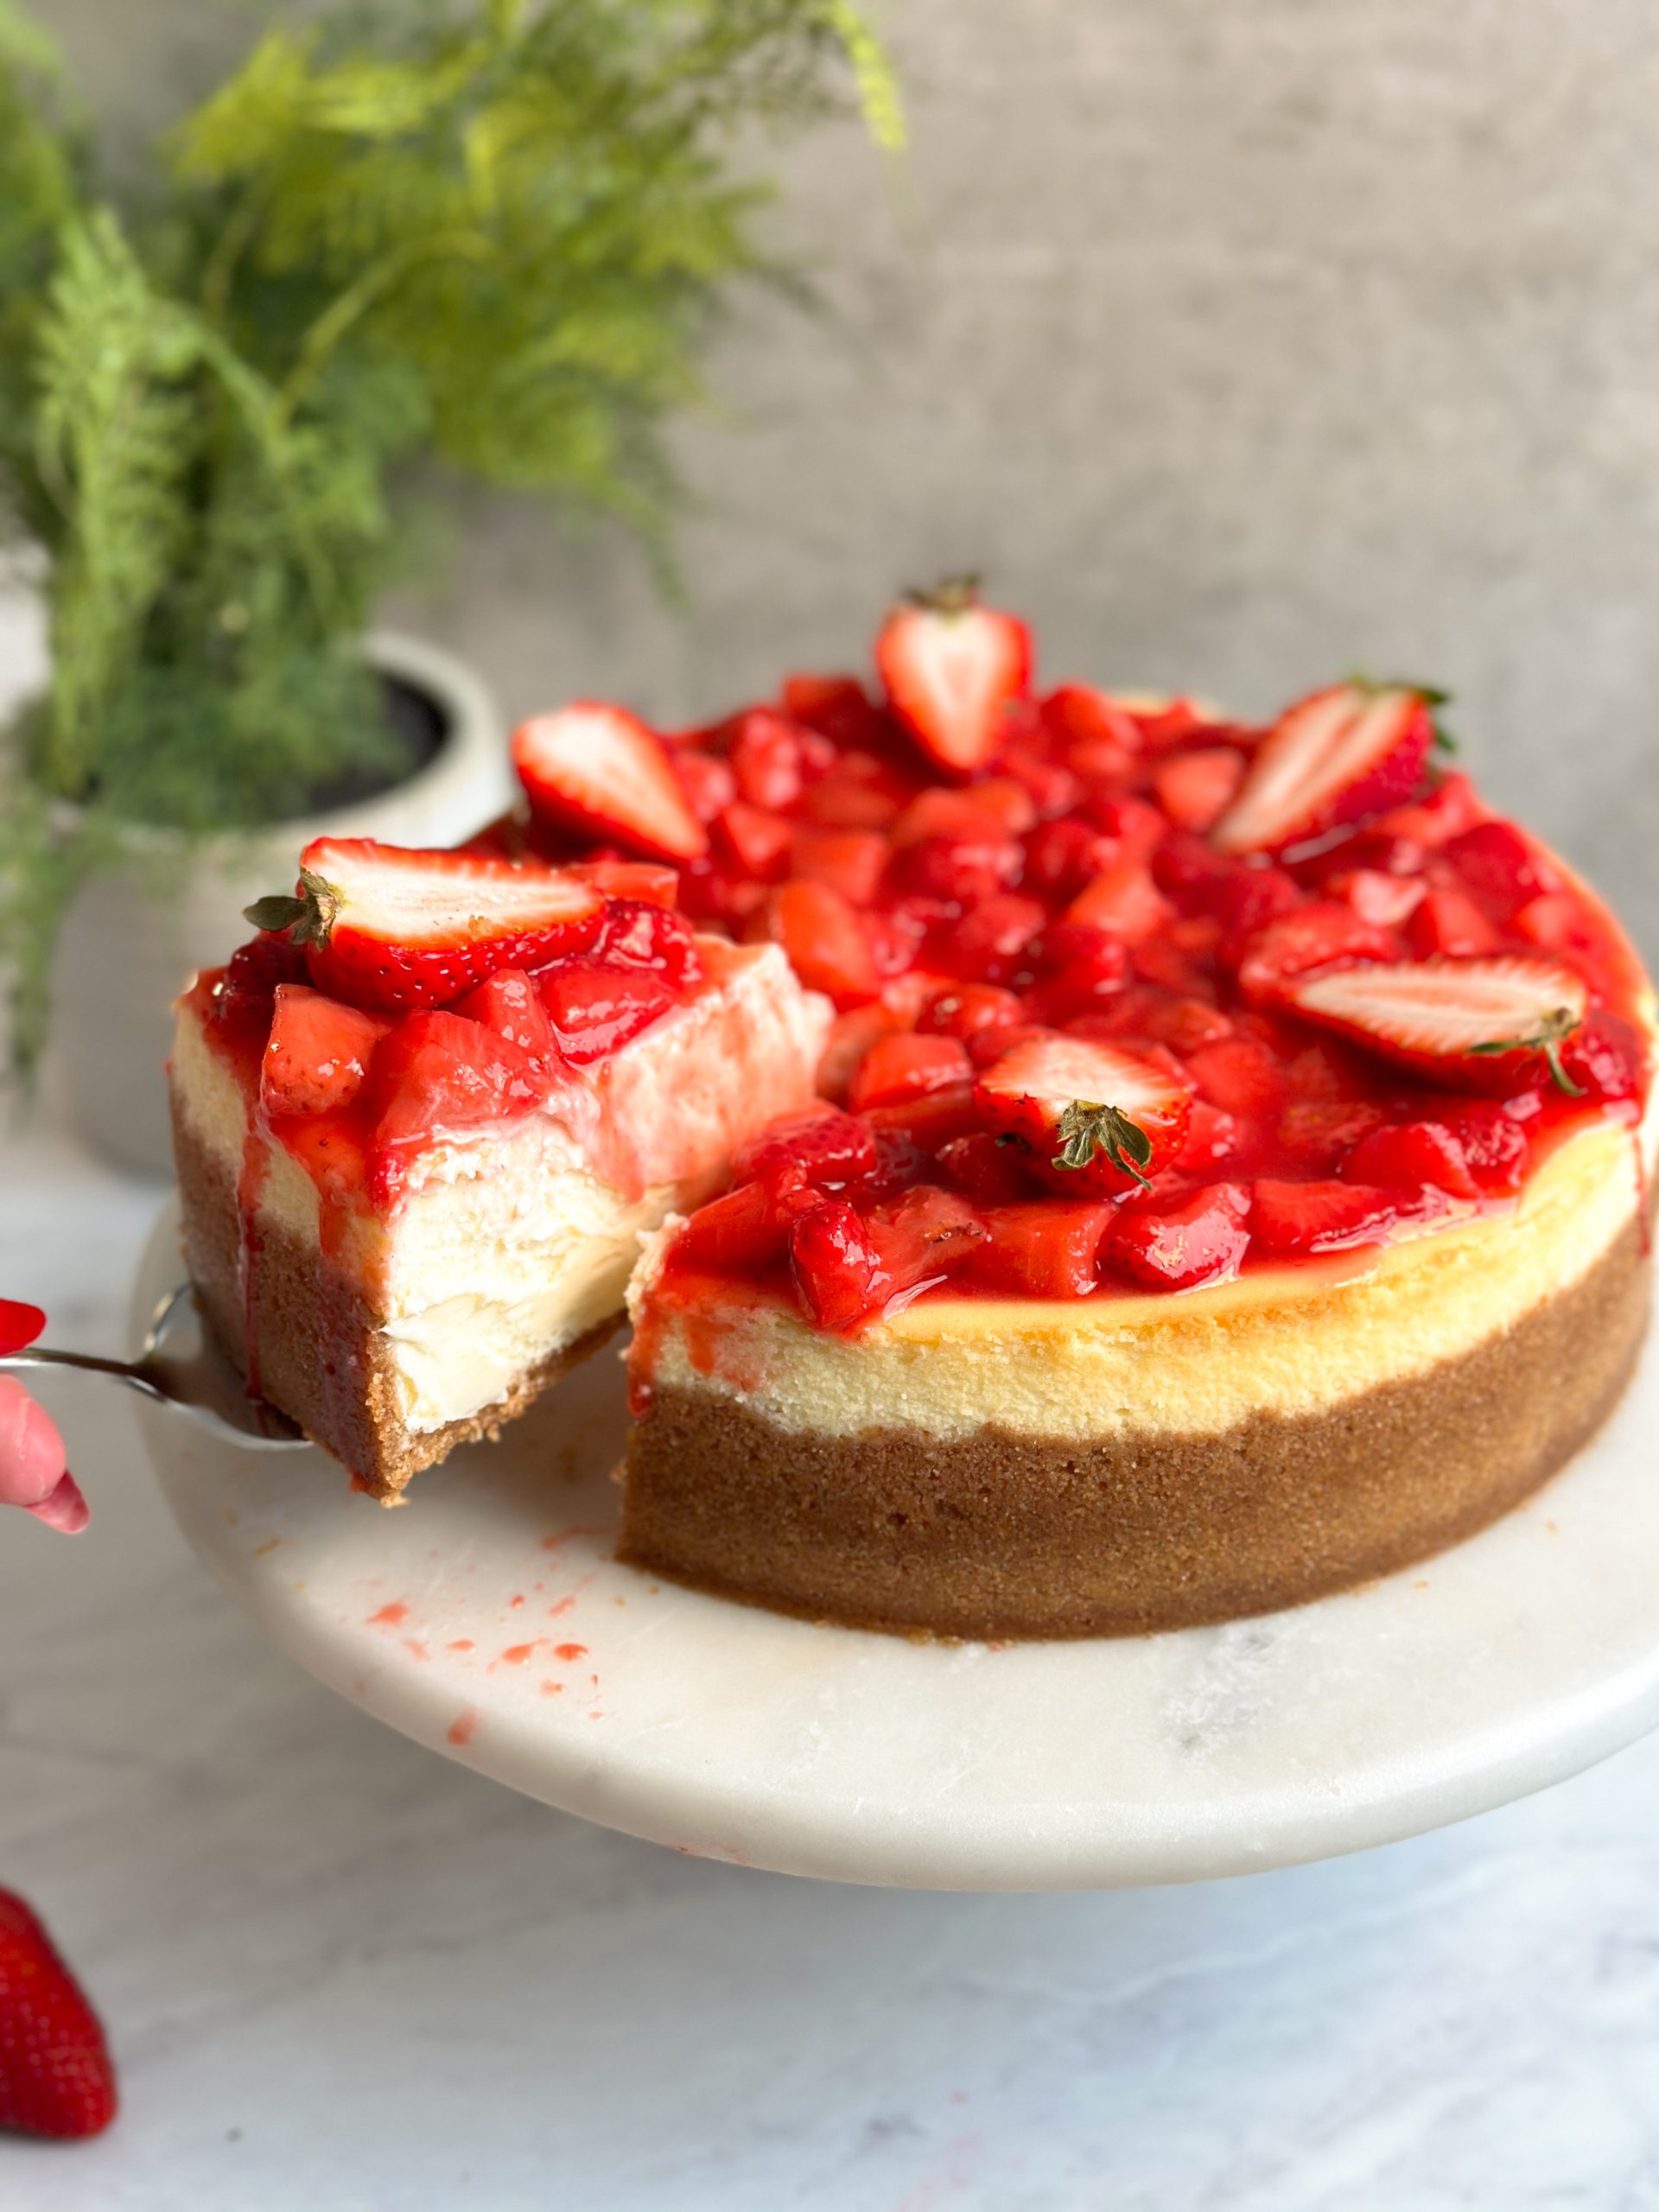 strawberry cheesecake on a serving stand with strawberry compote and fresh strawberries on top. A slice being taken out revealing creamy interior